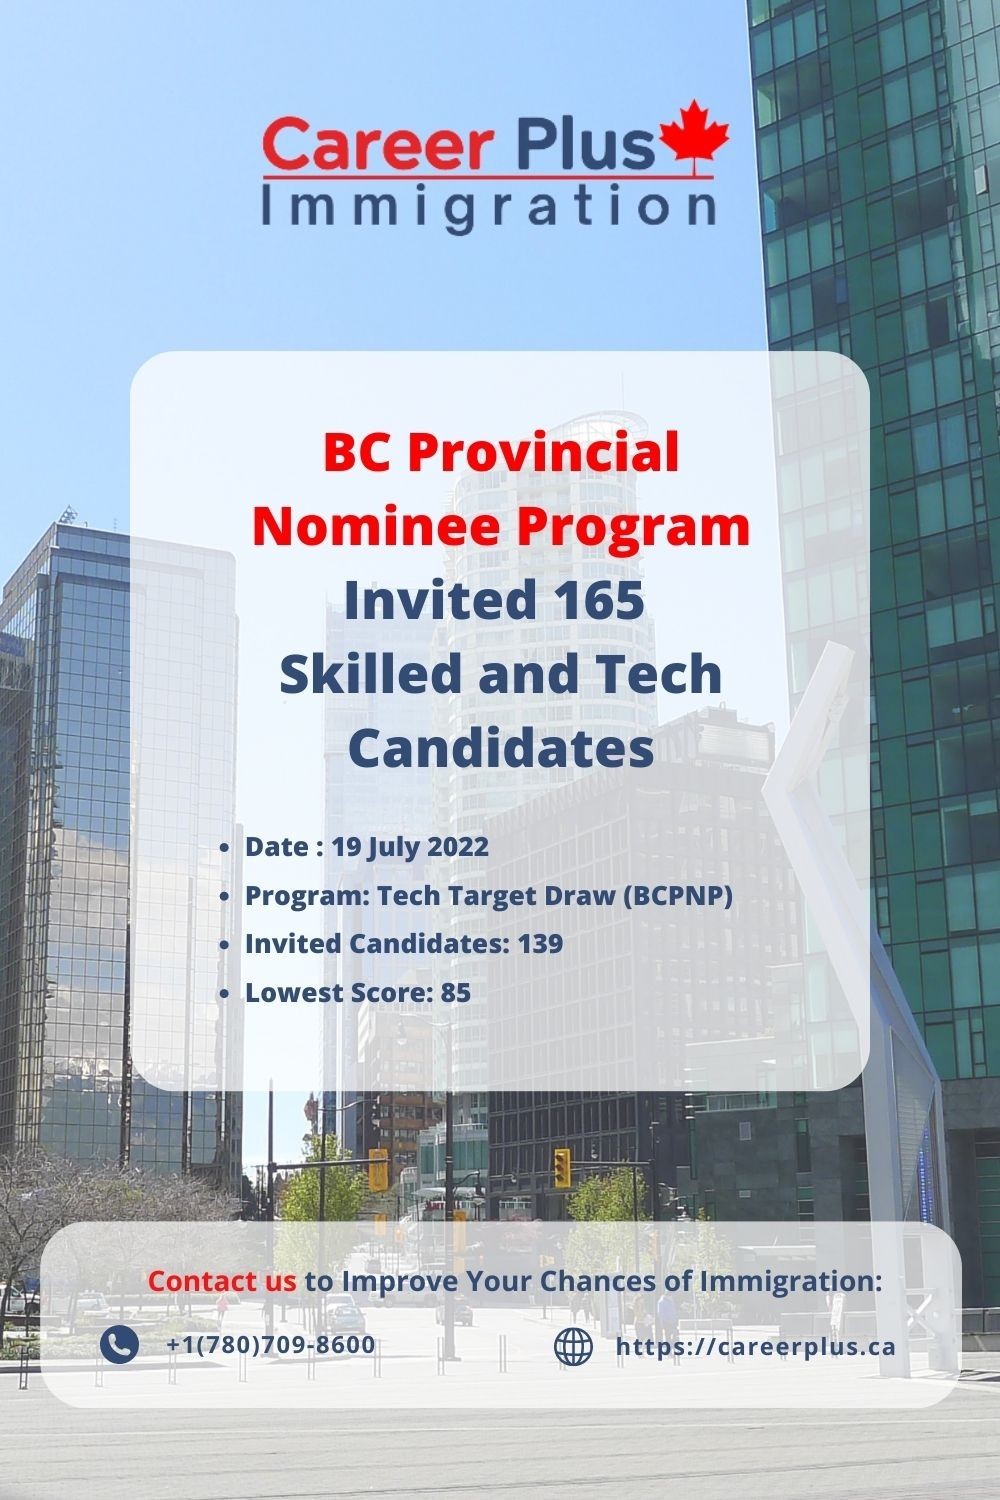 BC Provincial Nominee Program Invited 165 Skilled and Tech Candidates